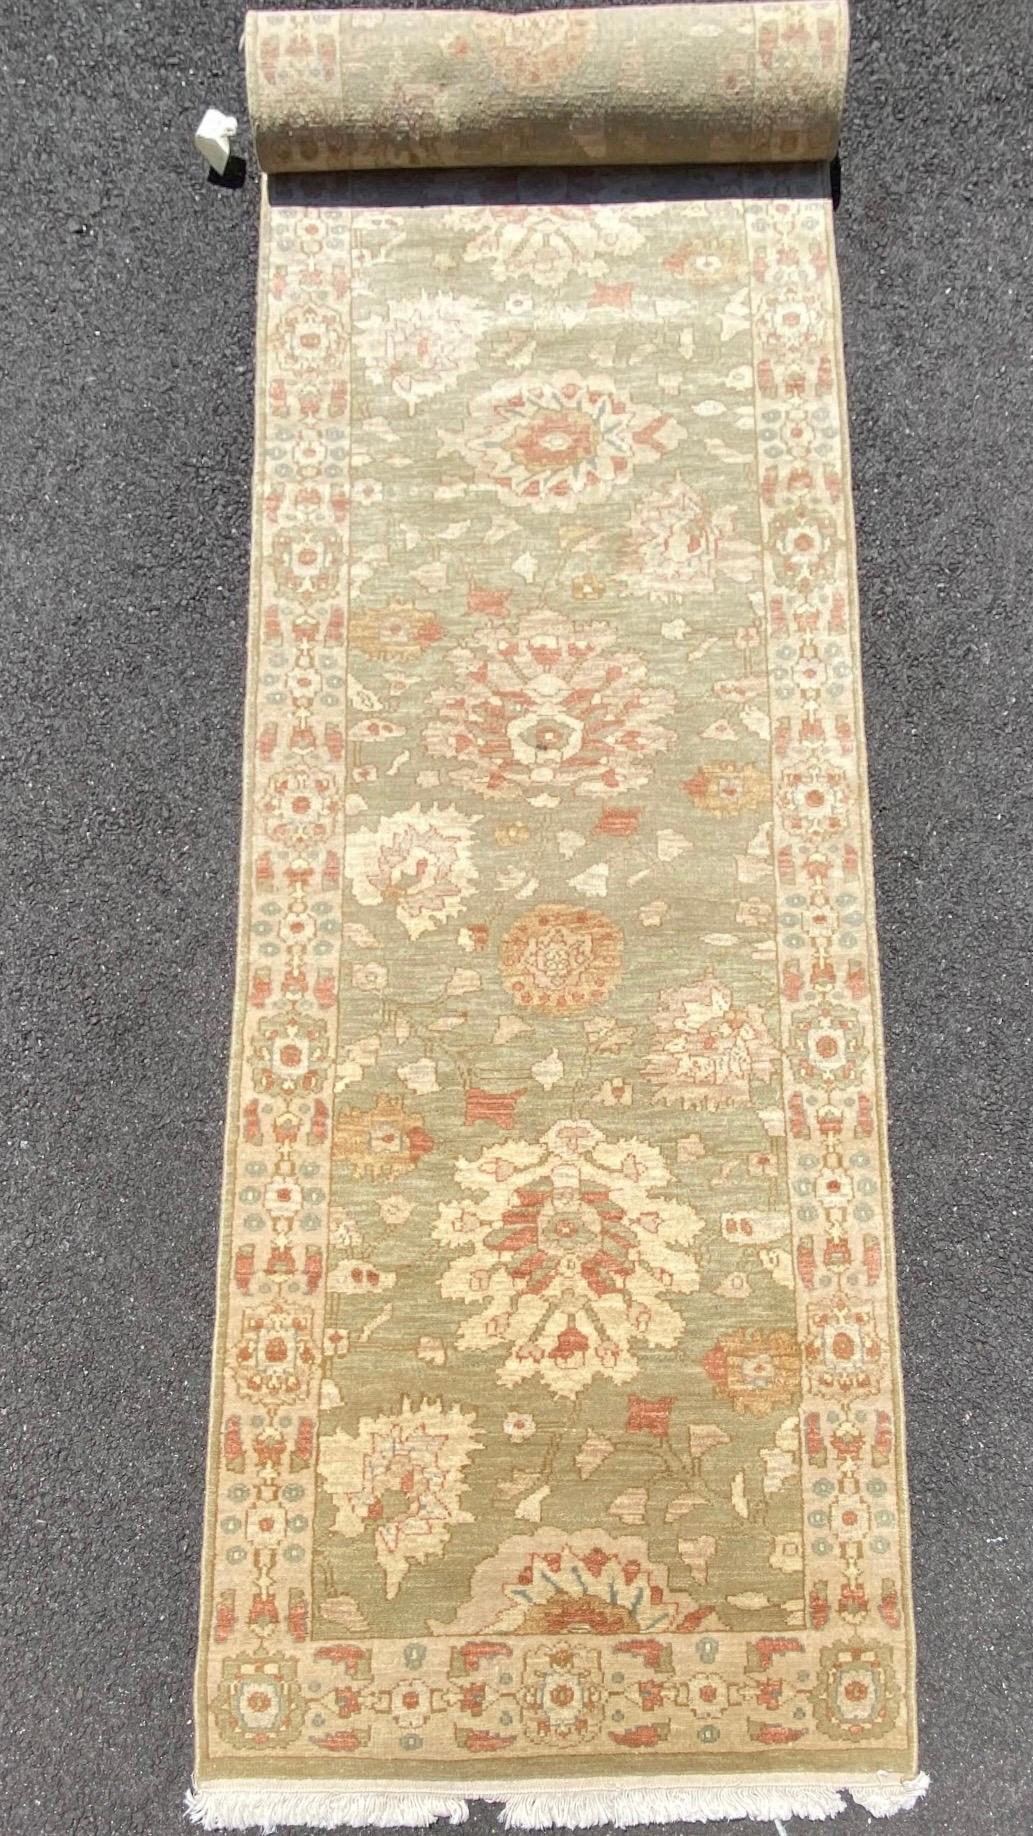 This is a new late 20th century green ivory floral Persian style narrow runner rug handwoven in Alexandria, Egypt in 1990s. We manufactured these rugs and the design and colors were hand chosen by us and we have a wide variety of sizes in this